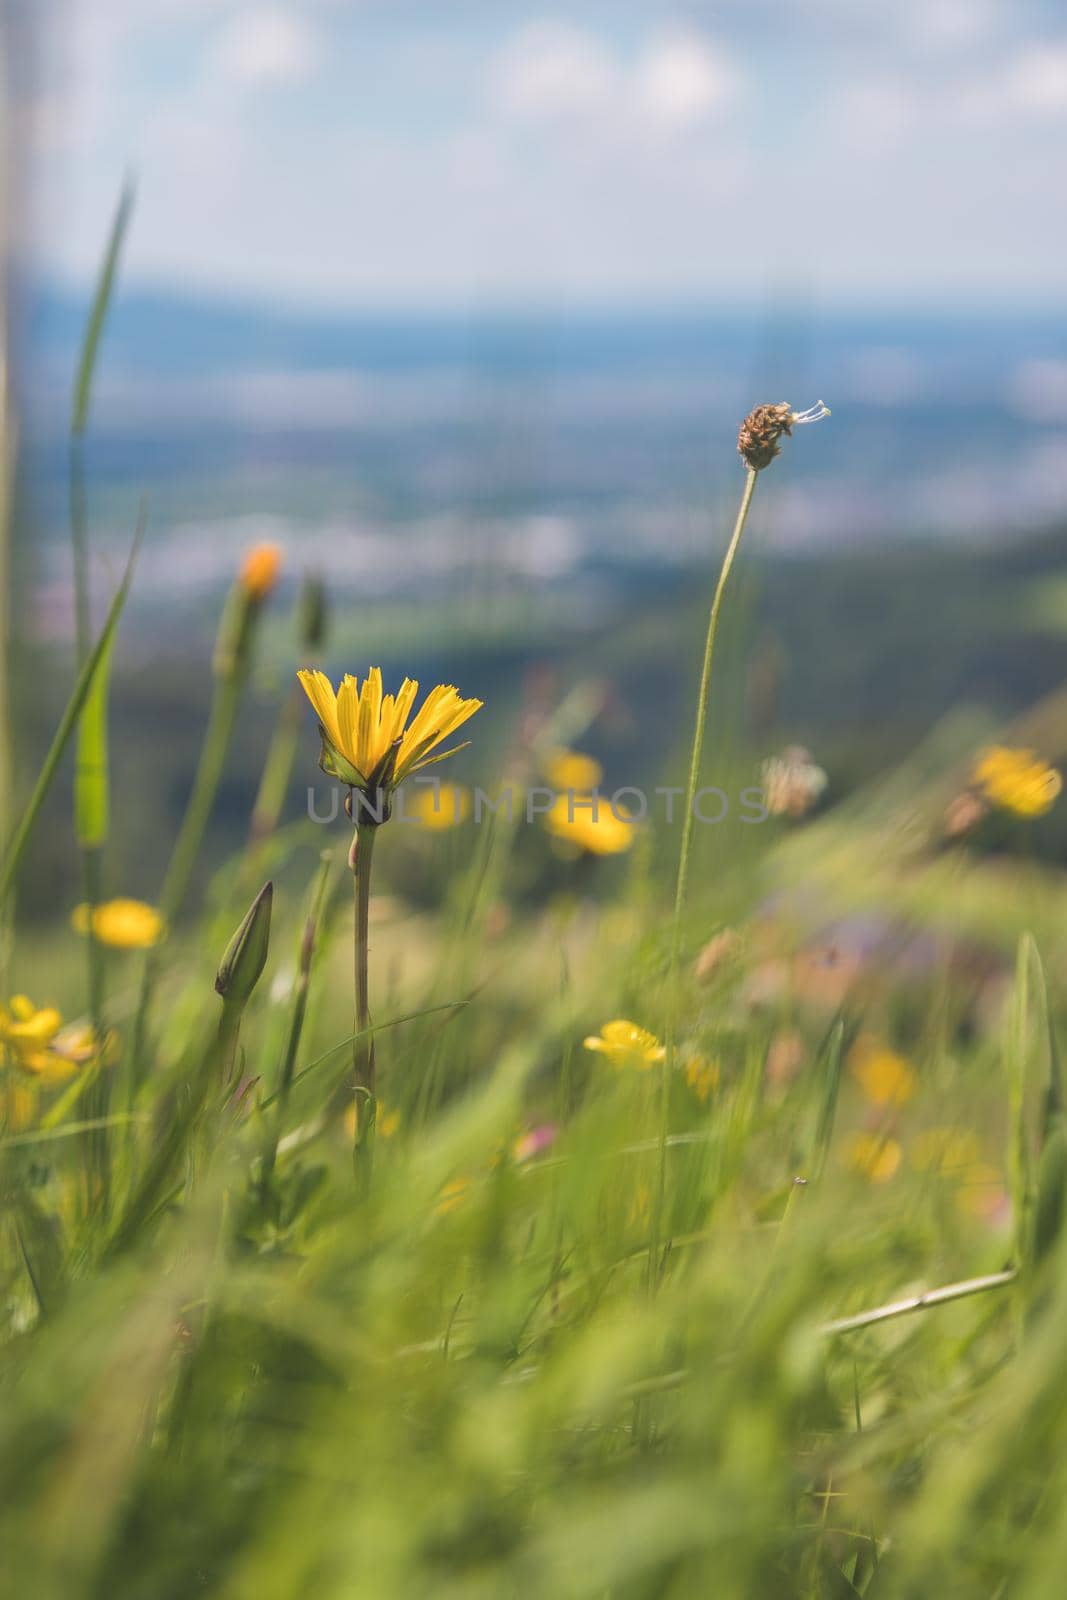 Hiking holiday concept: Cute fresh flowers in spring, colorful summer wildflowers meadow by Daxenbichler